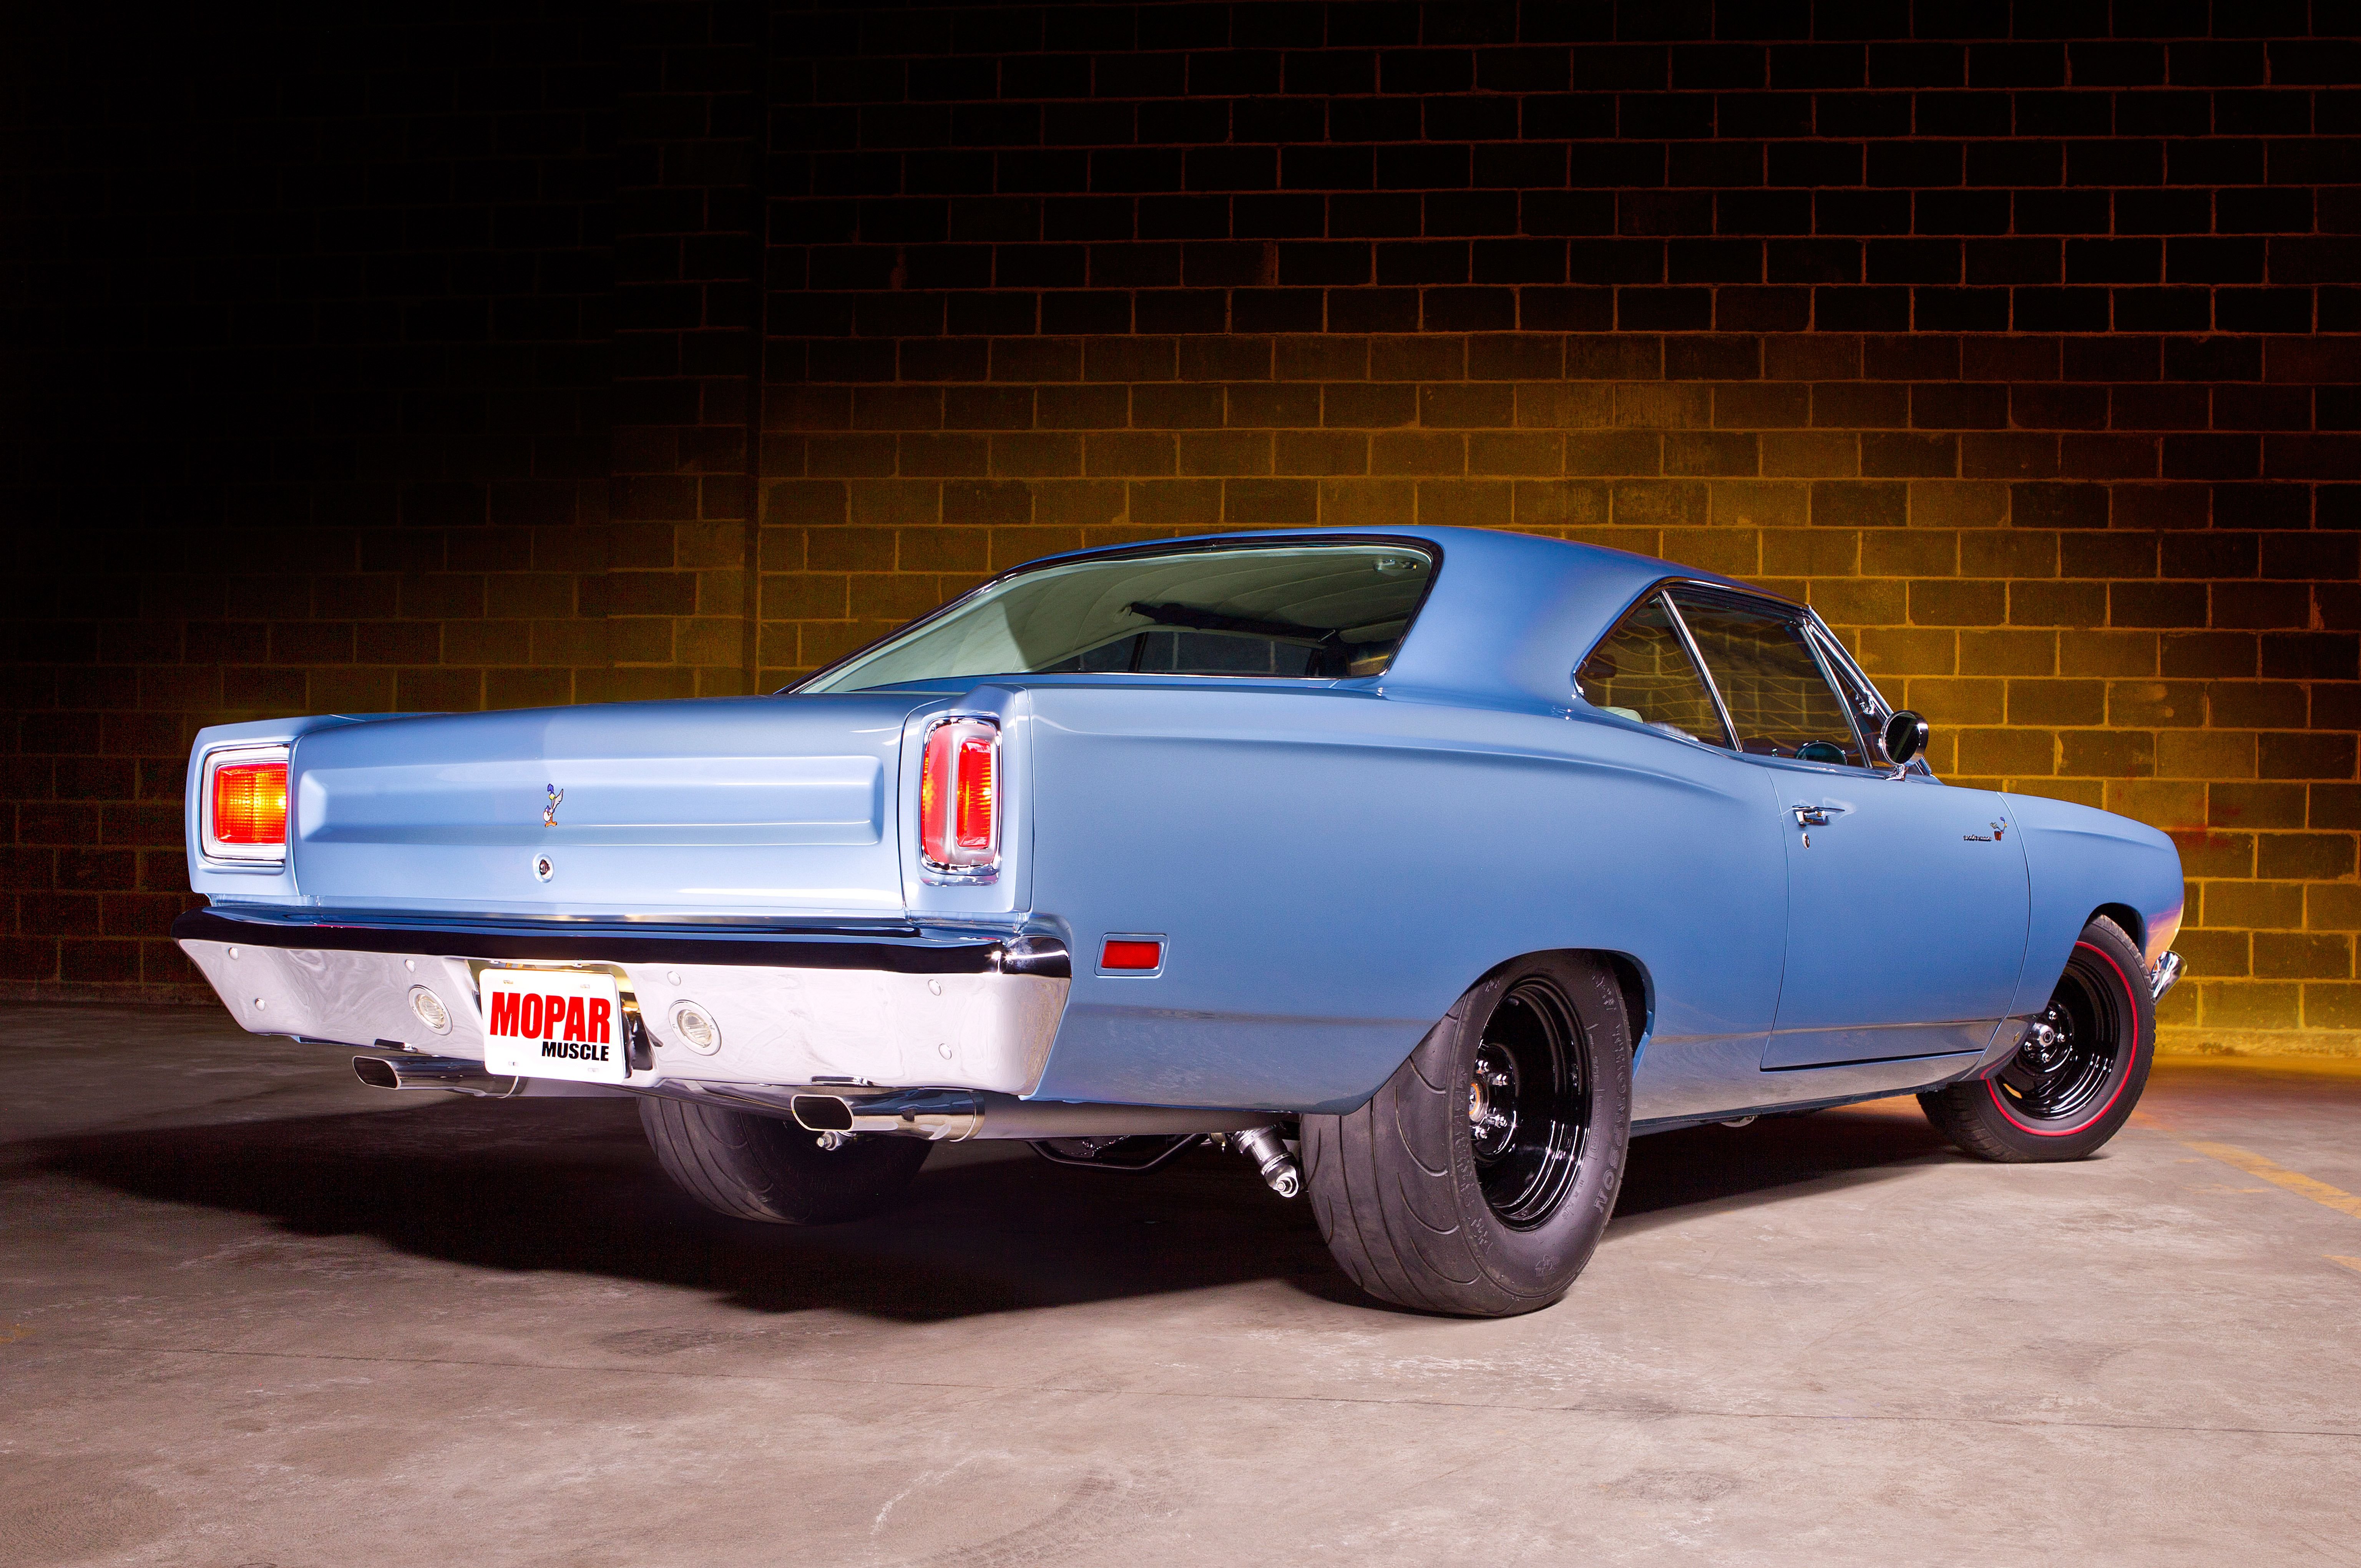 1969 Plymouth Road Runner cars coupe wallpaper | 6144x4080 ...